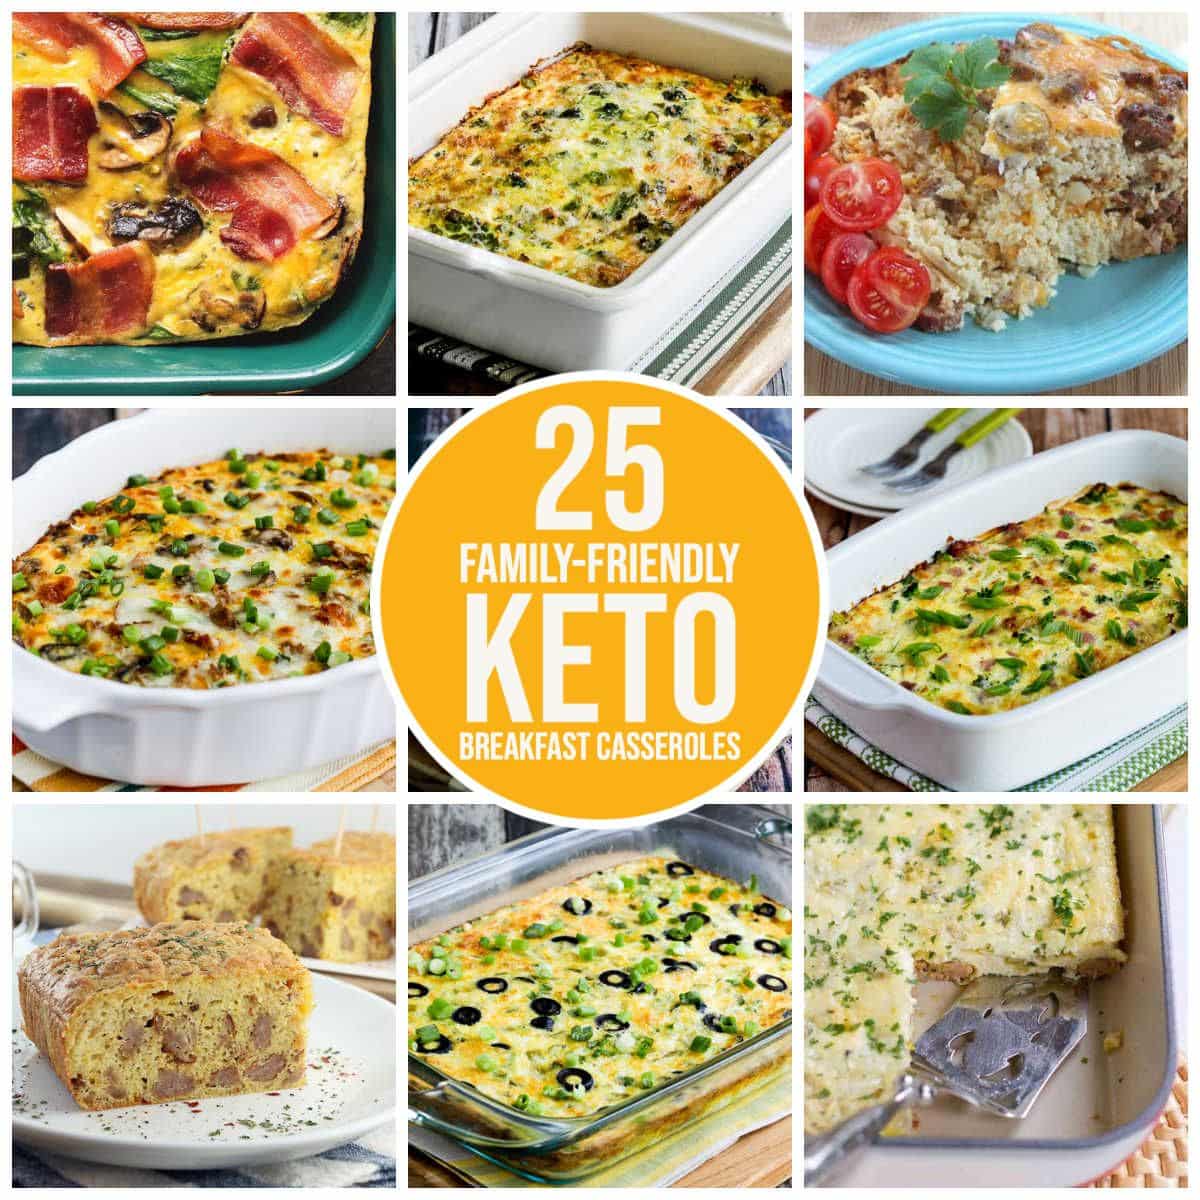 25 Family Friendly Keto Breakfast Casseroles collage of featured recipes with text overlay